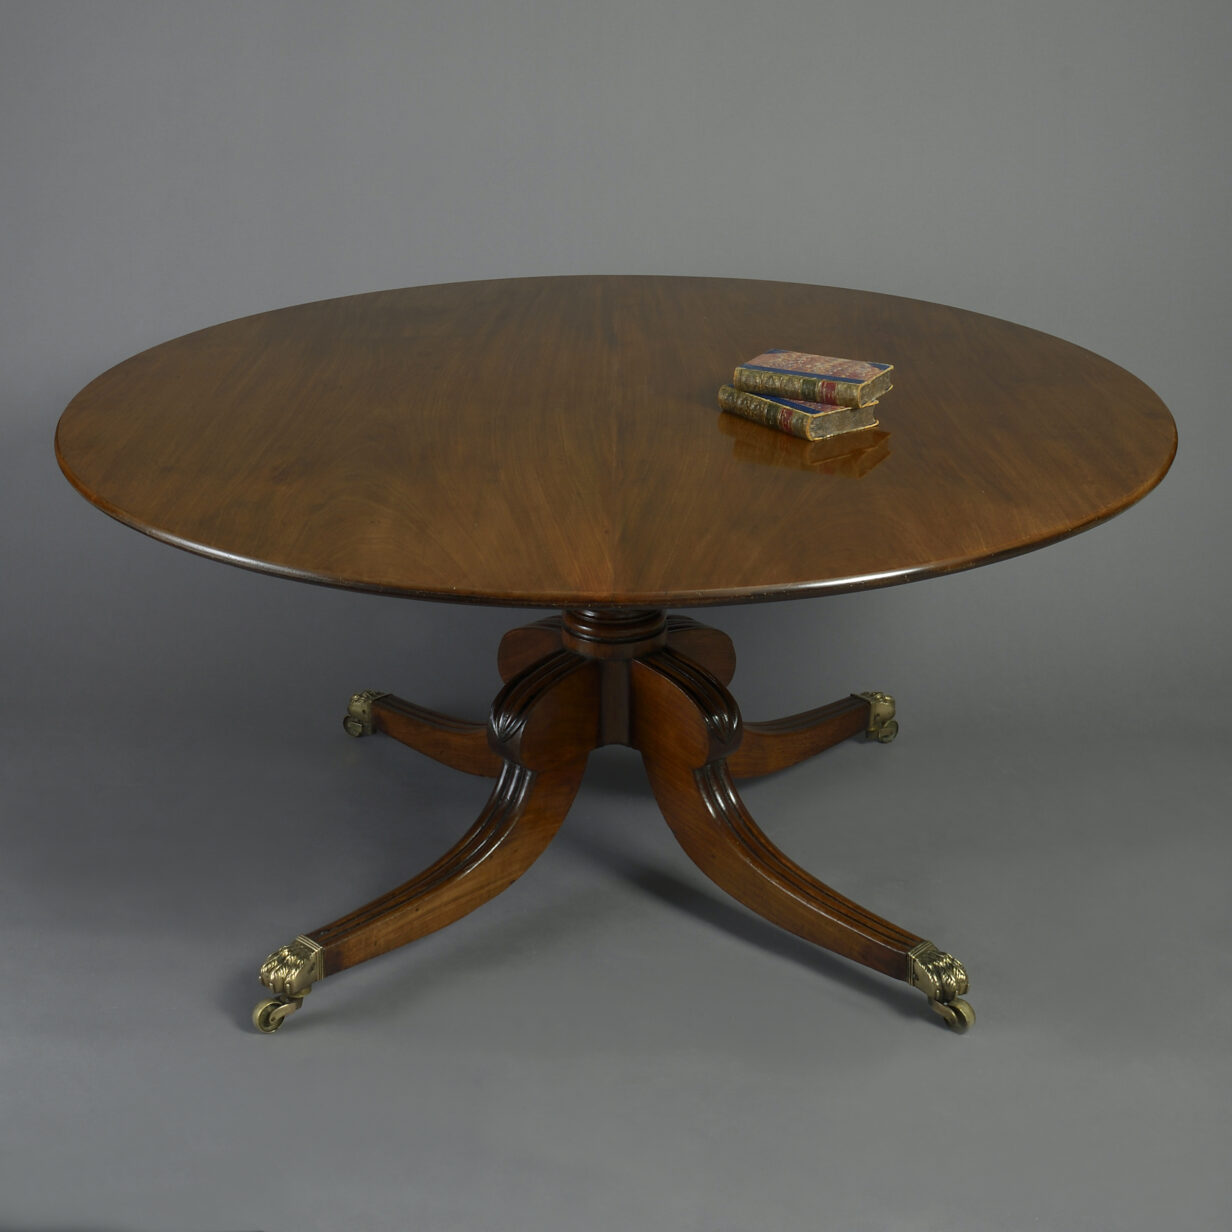 Large Scale Early 19th Century Regency Period Circular Mahogany Dining Table